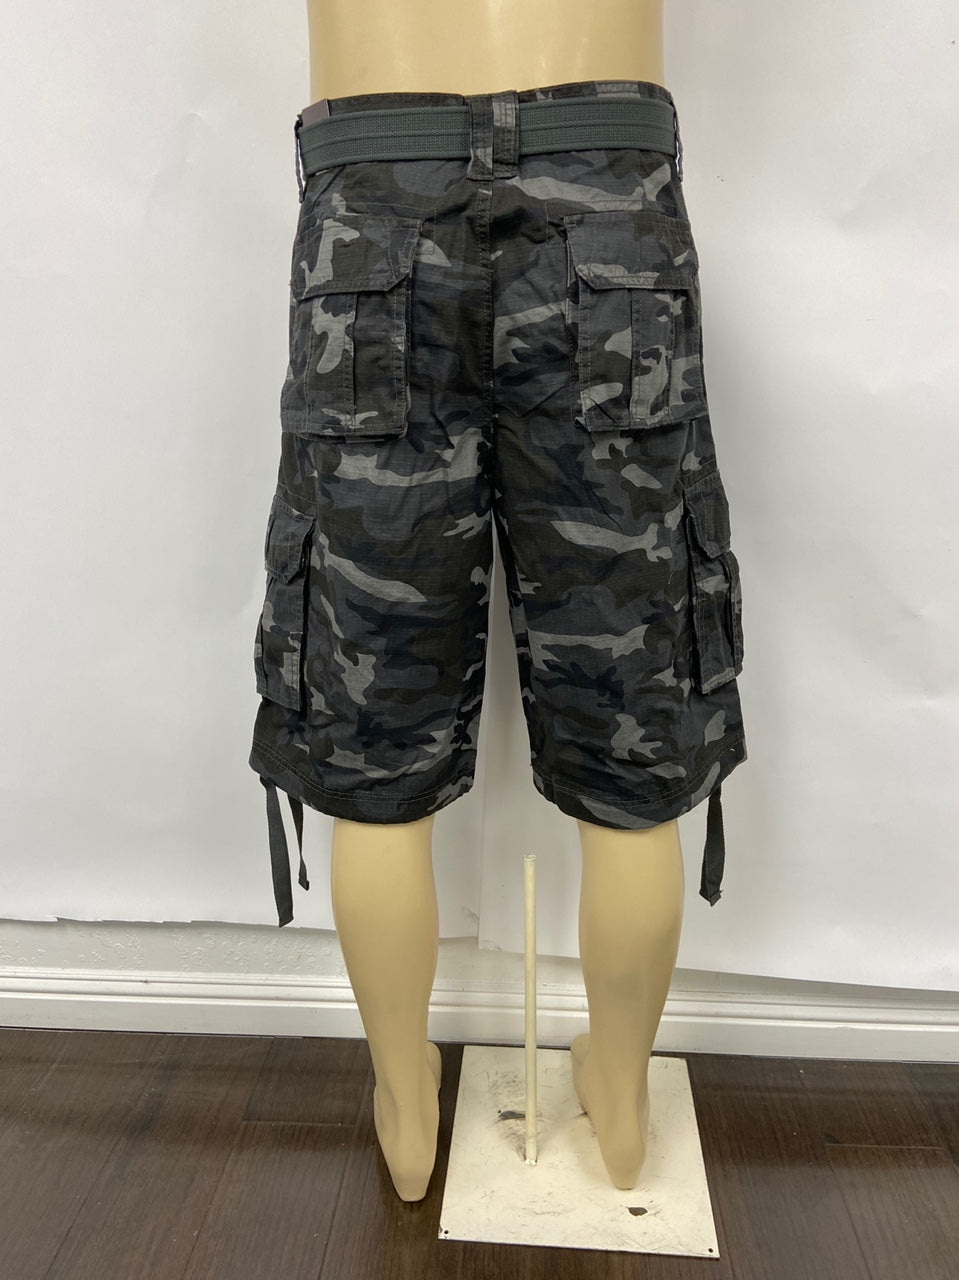 Camoflauge Military Cargo Shorts with Pockets